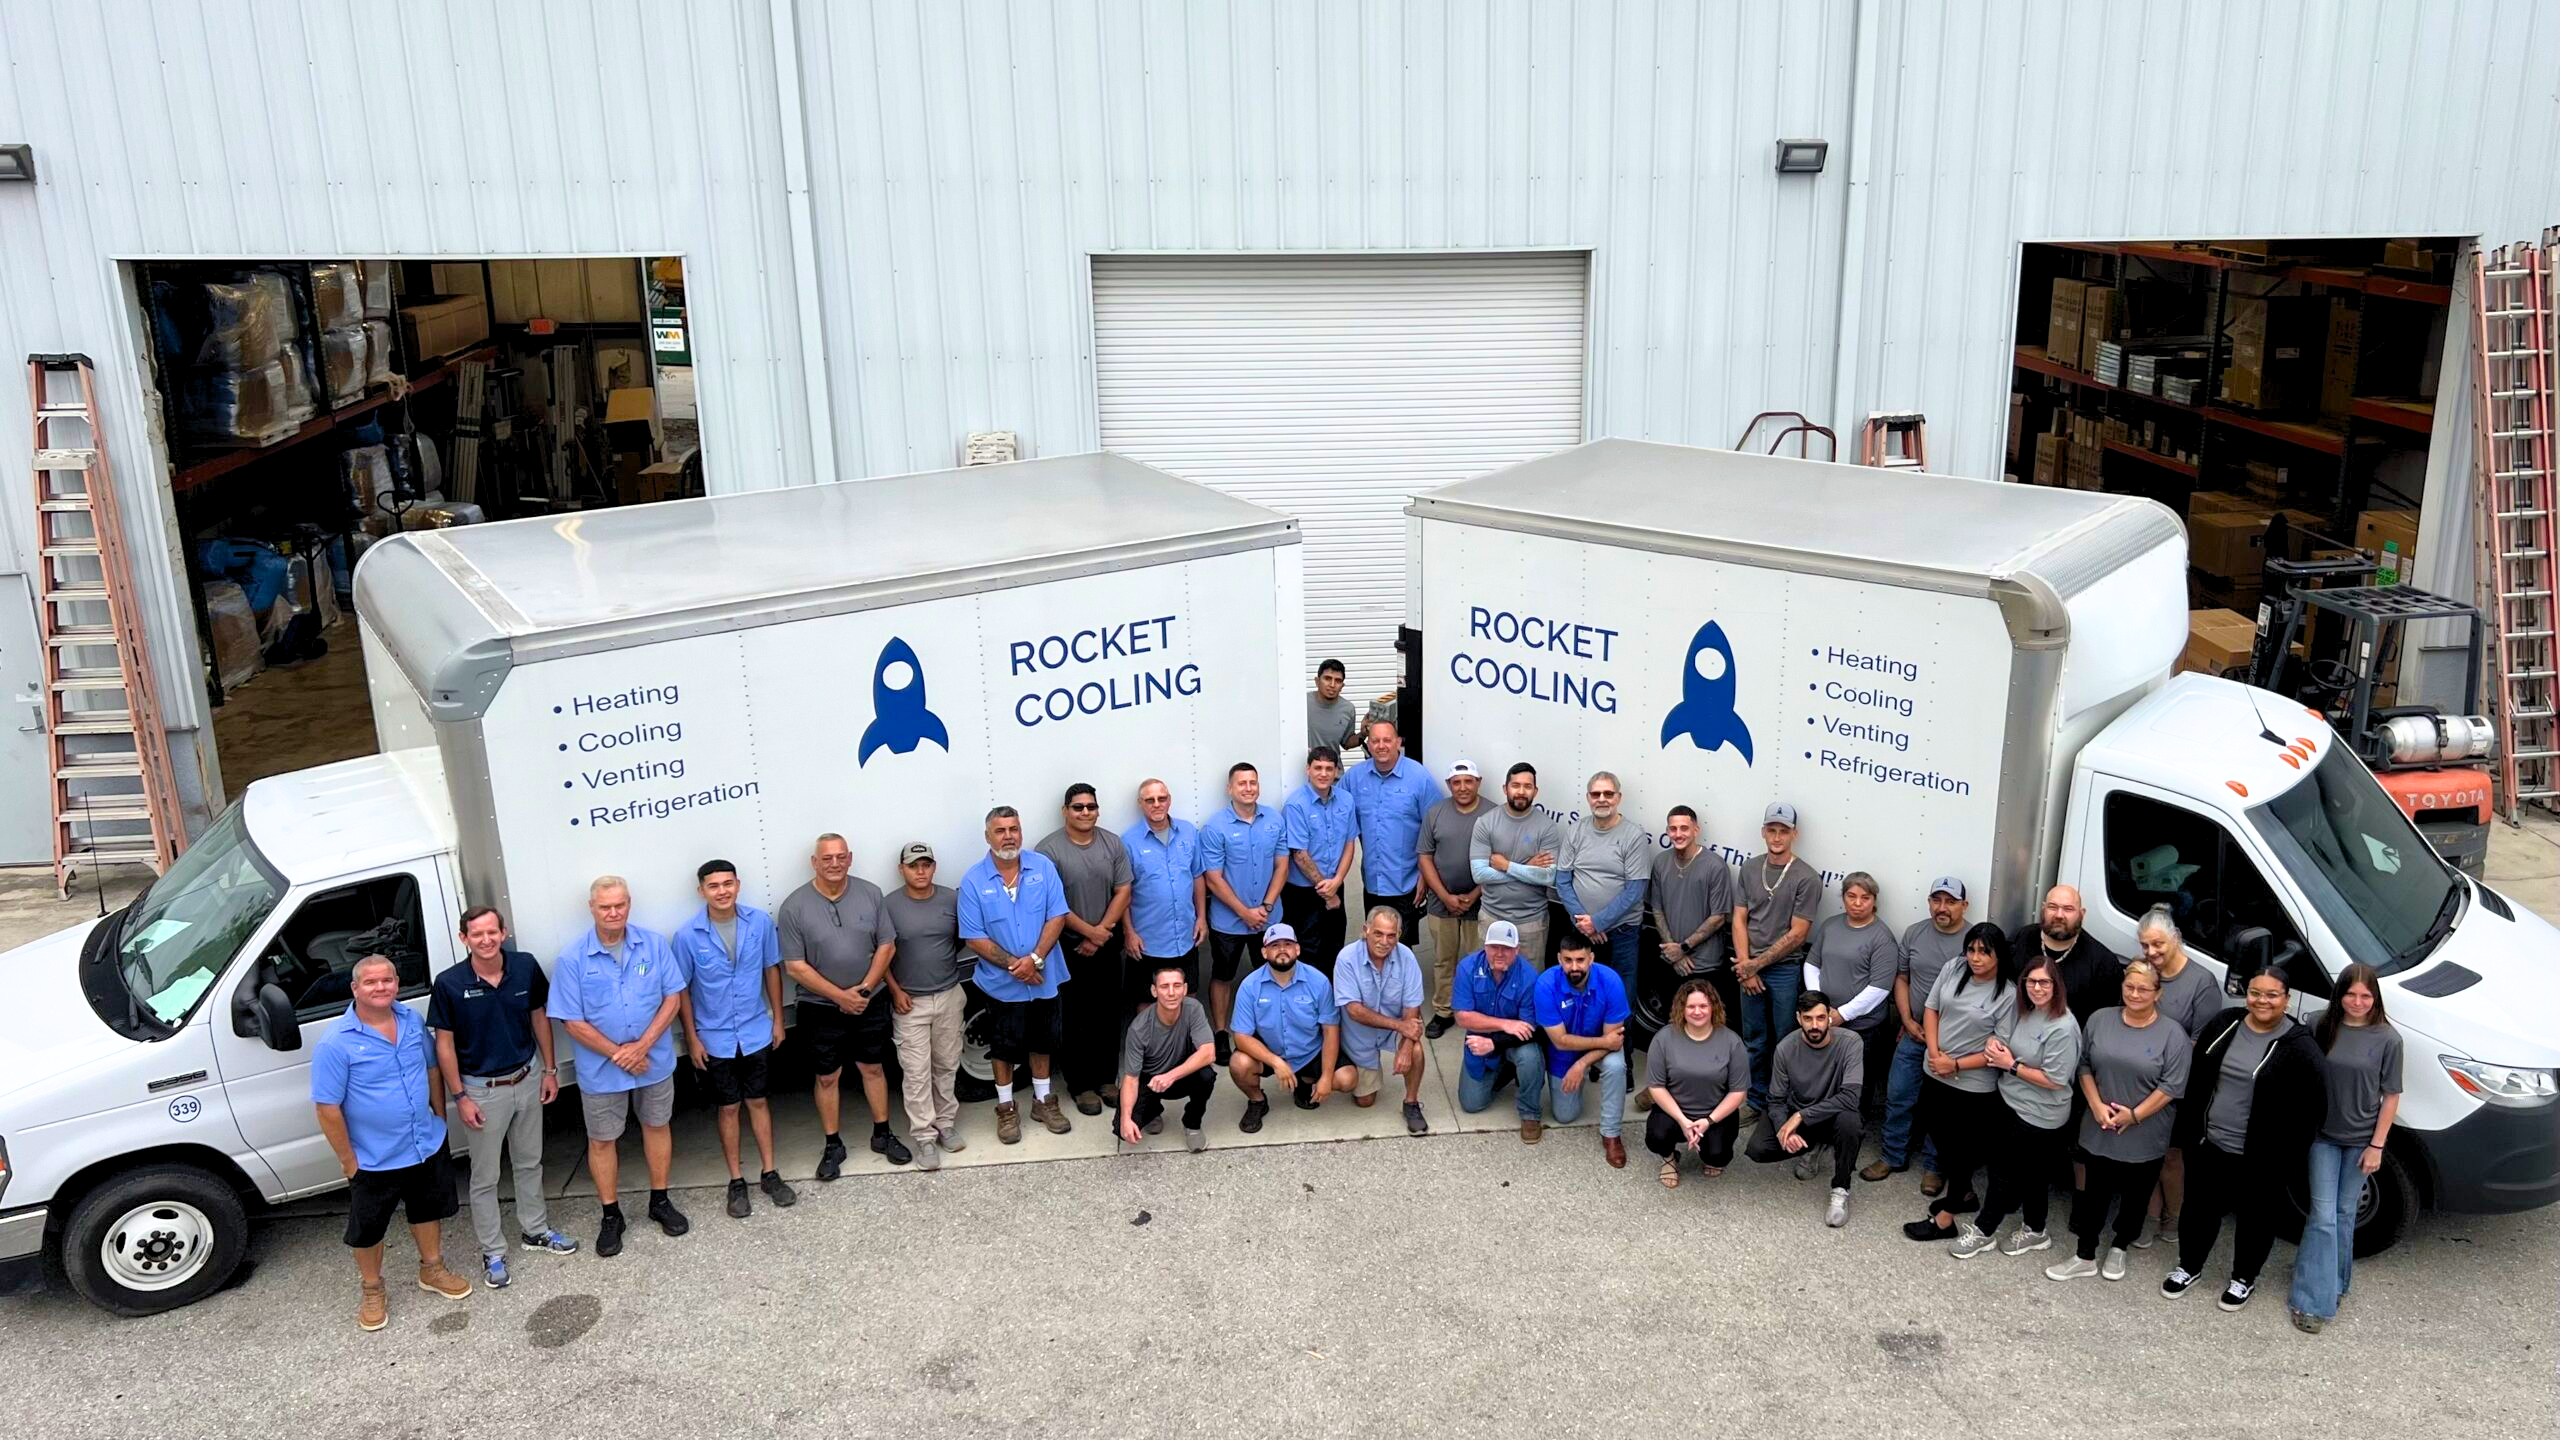 Rocket Cooling team standing in front of service trucks